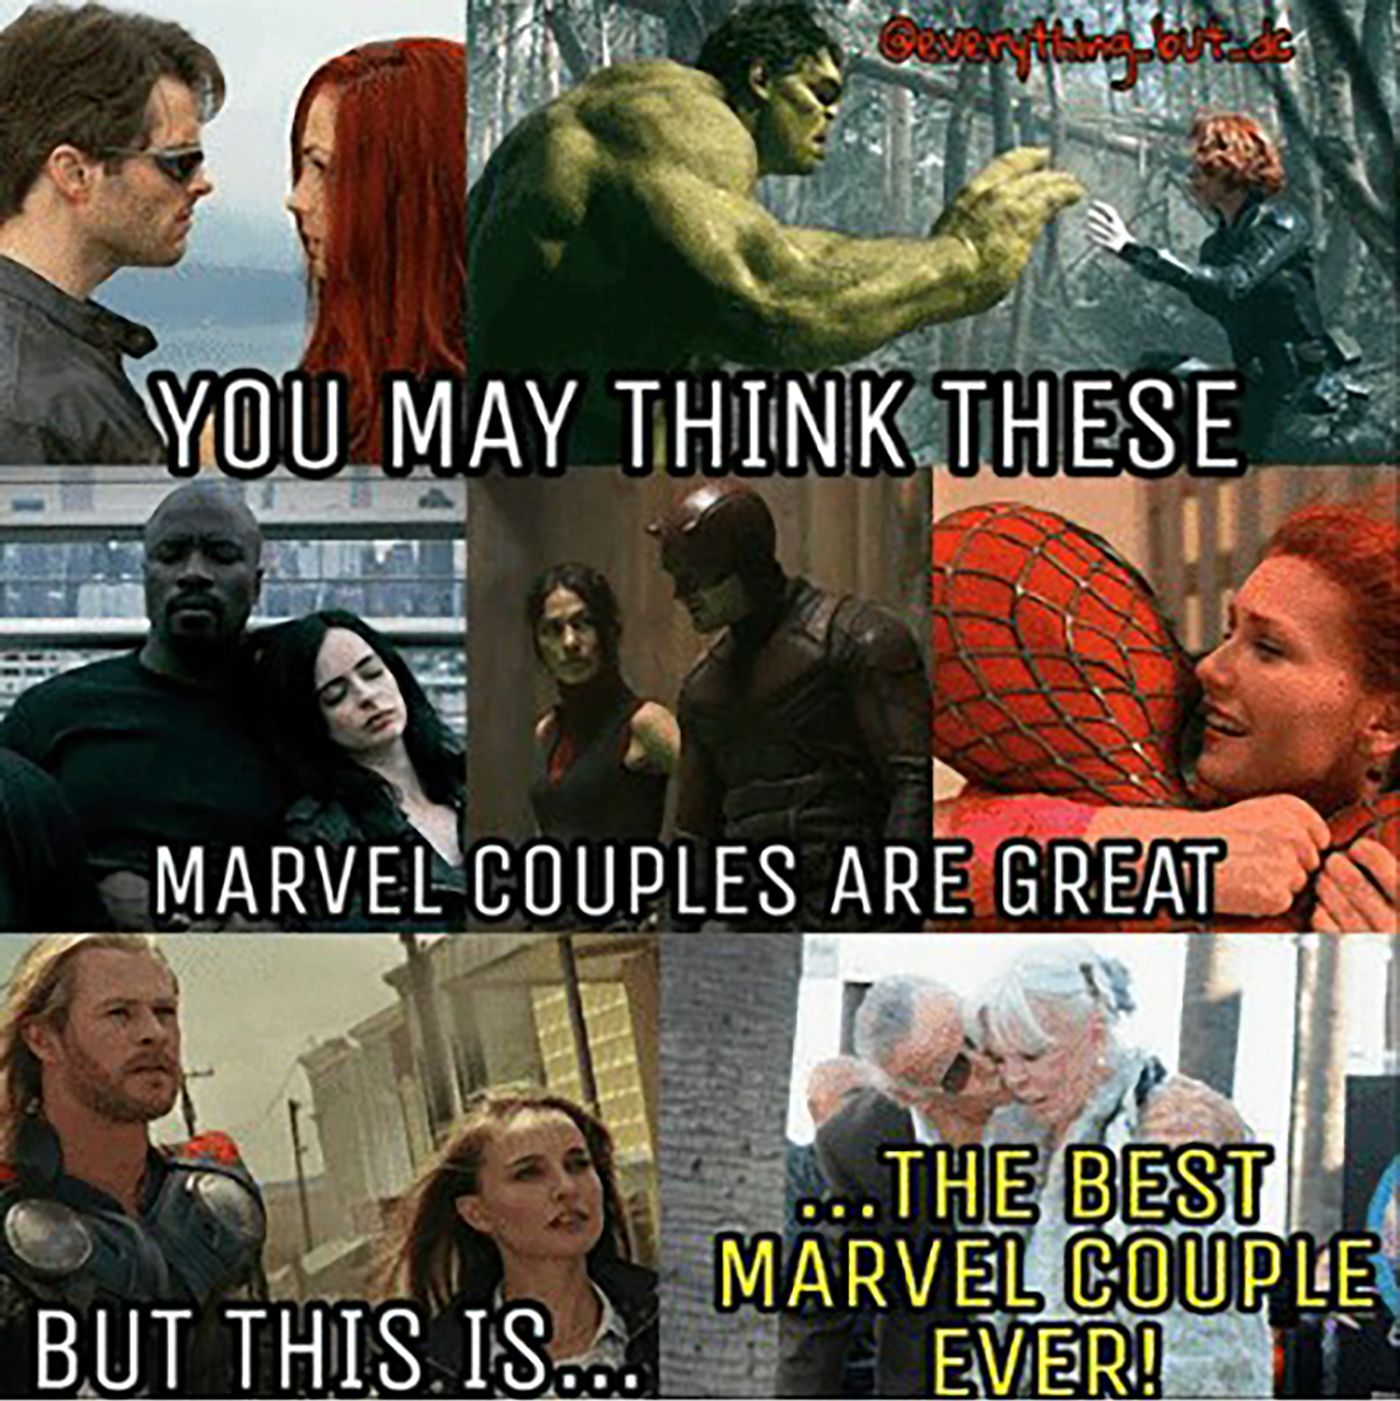 The Best Marvel Couple